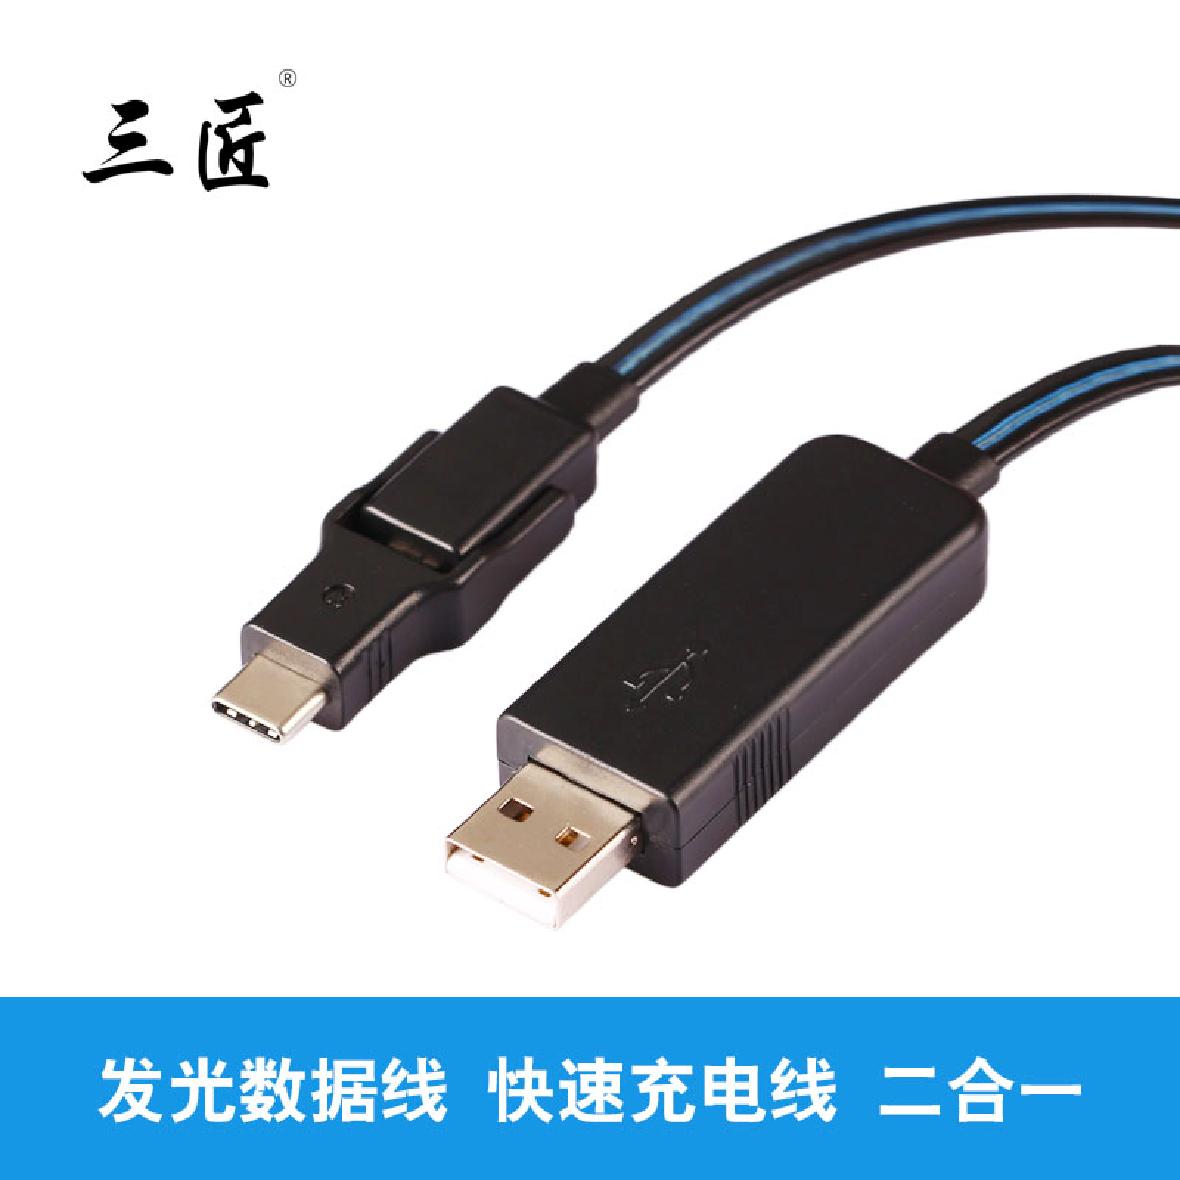  USB2.0 luminous data cable Android/Type-c; Android/Apple two-in-one charging cable el cold light fast charging data cable